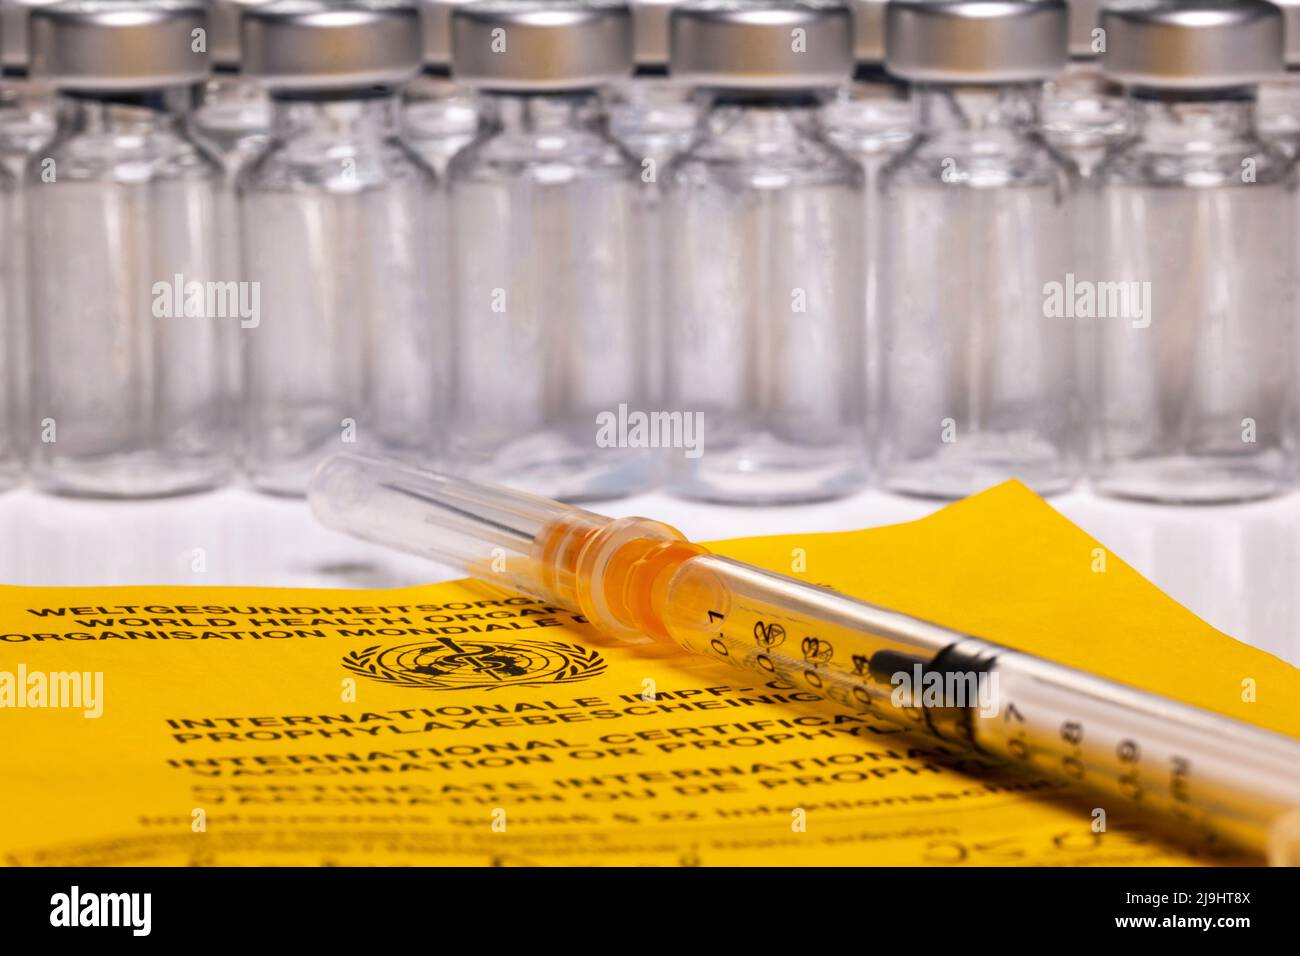 International vaccination certificate with several ampoules and wound syringe Stock Photo